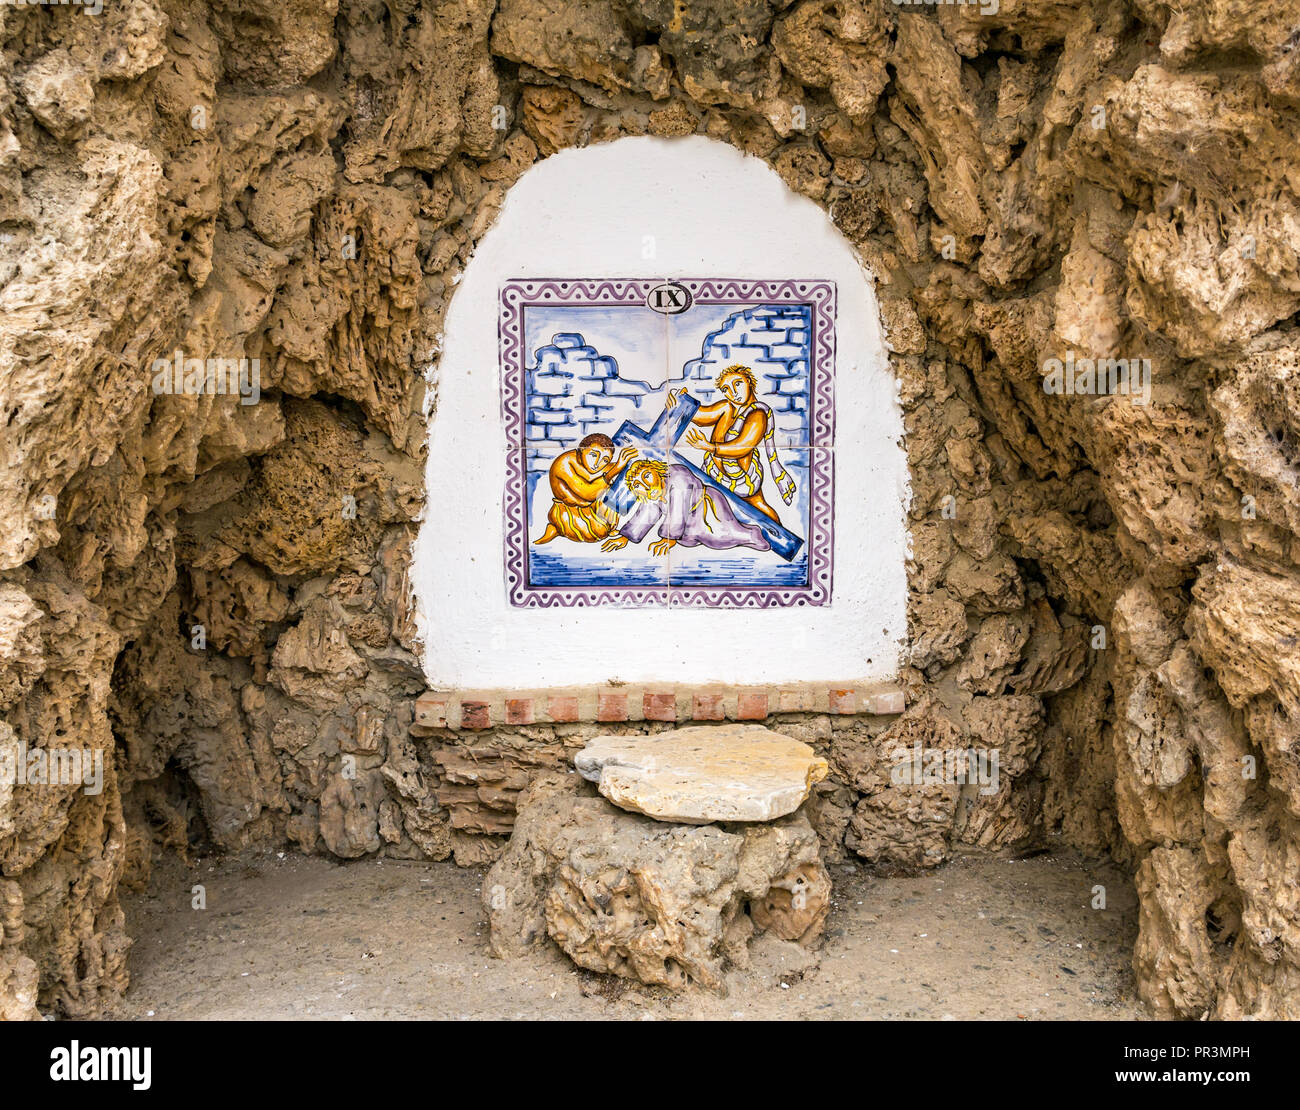 Colourful ceramic tiles on wall depicting Catholic faith ninth station of the cross, Salares, Axarquia, Andalusia, Spain Stock Photo